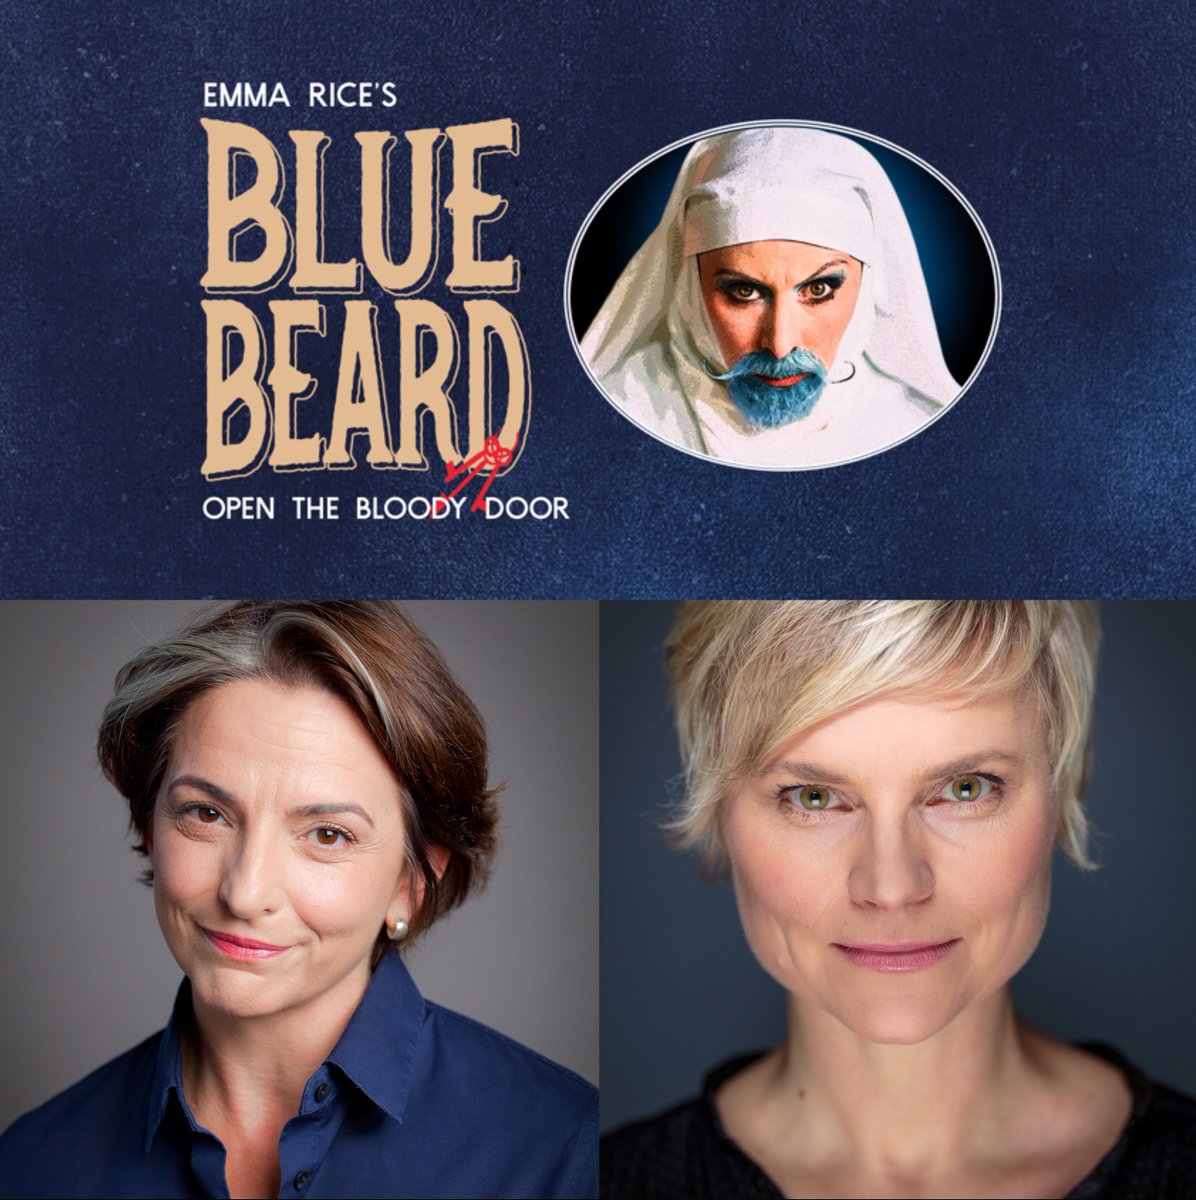 Wishing a wonderful first performance to #PatrycjaKujawaska for the UK tour of @Wise_Children's #BlueBeard at @TheatreRBath, with choreography and movement direction by @EttaMurfitt !